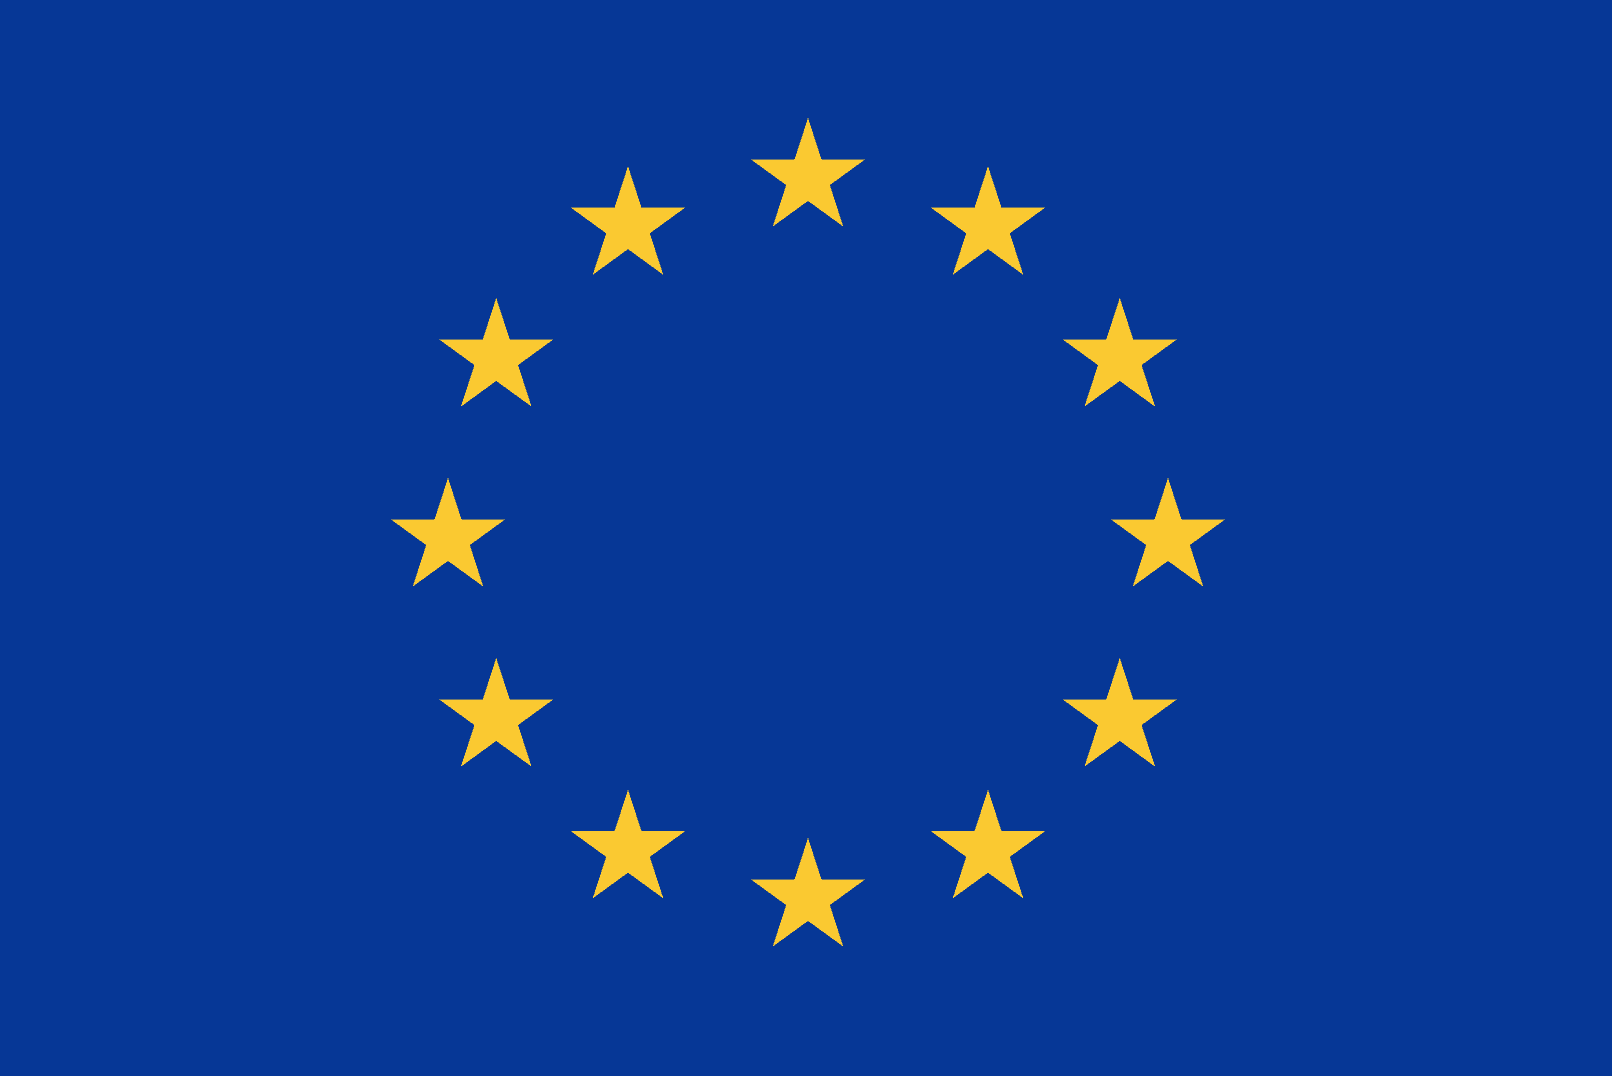 The Flag of Europe